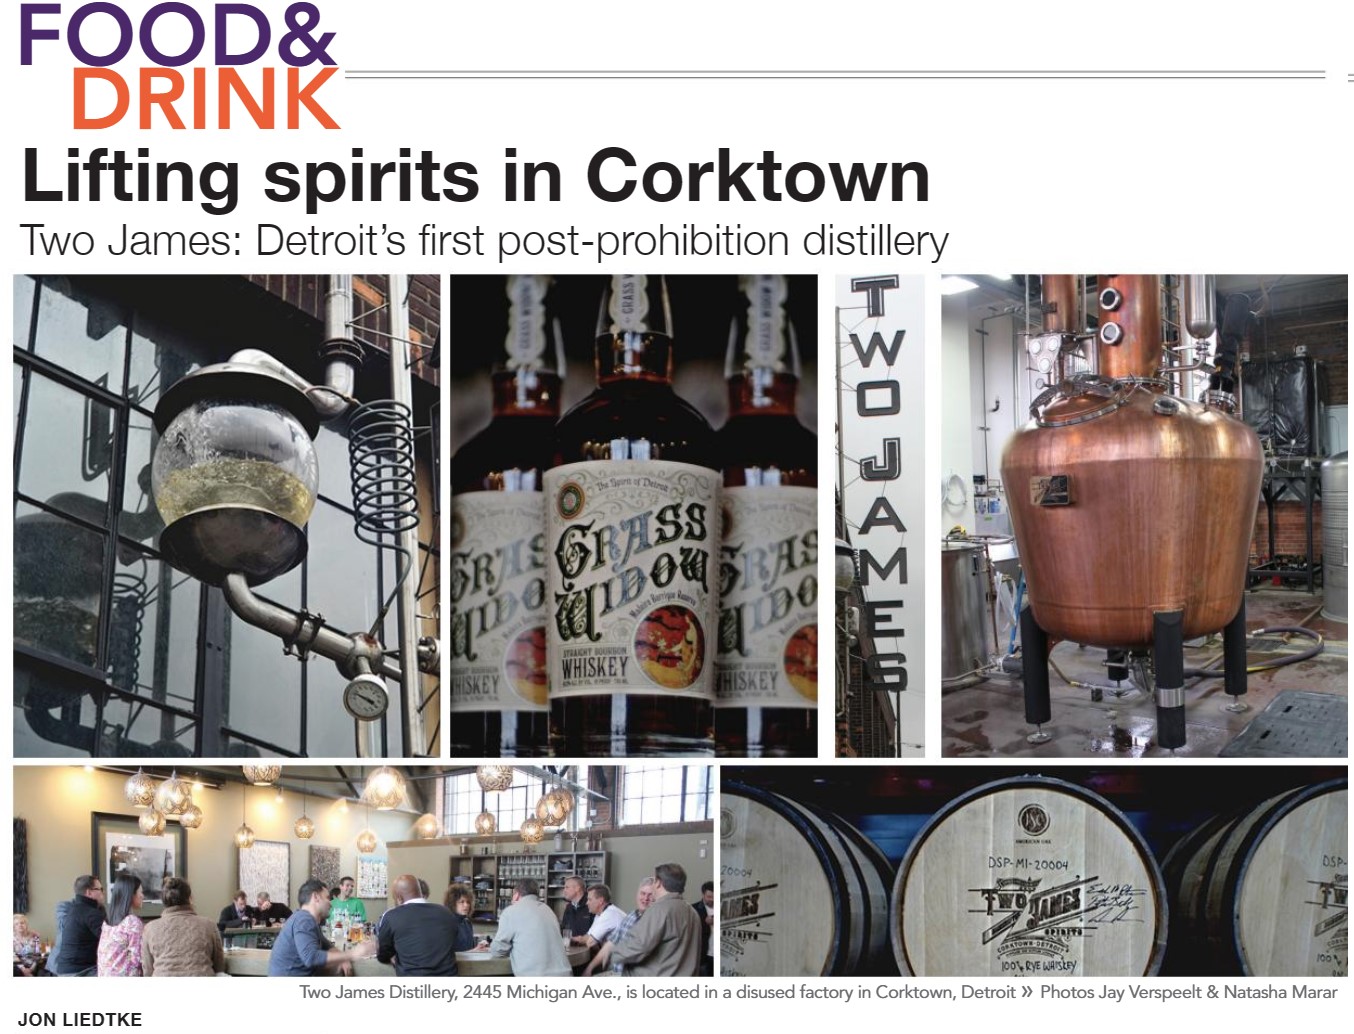 The Urbanite: Lifting spirits in Corktown: Two James is Detroit’s first post-prohibition distillery